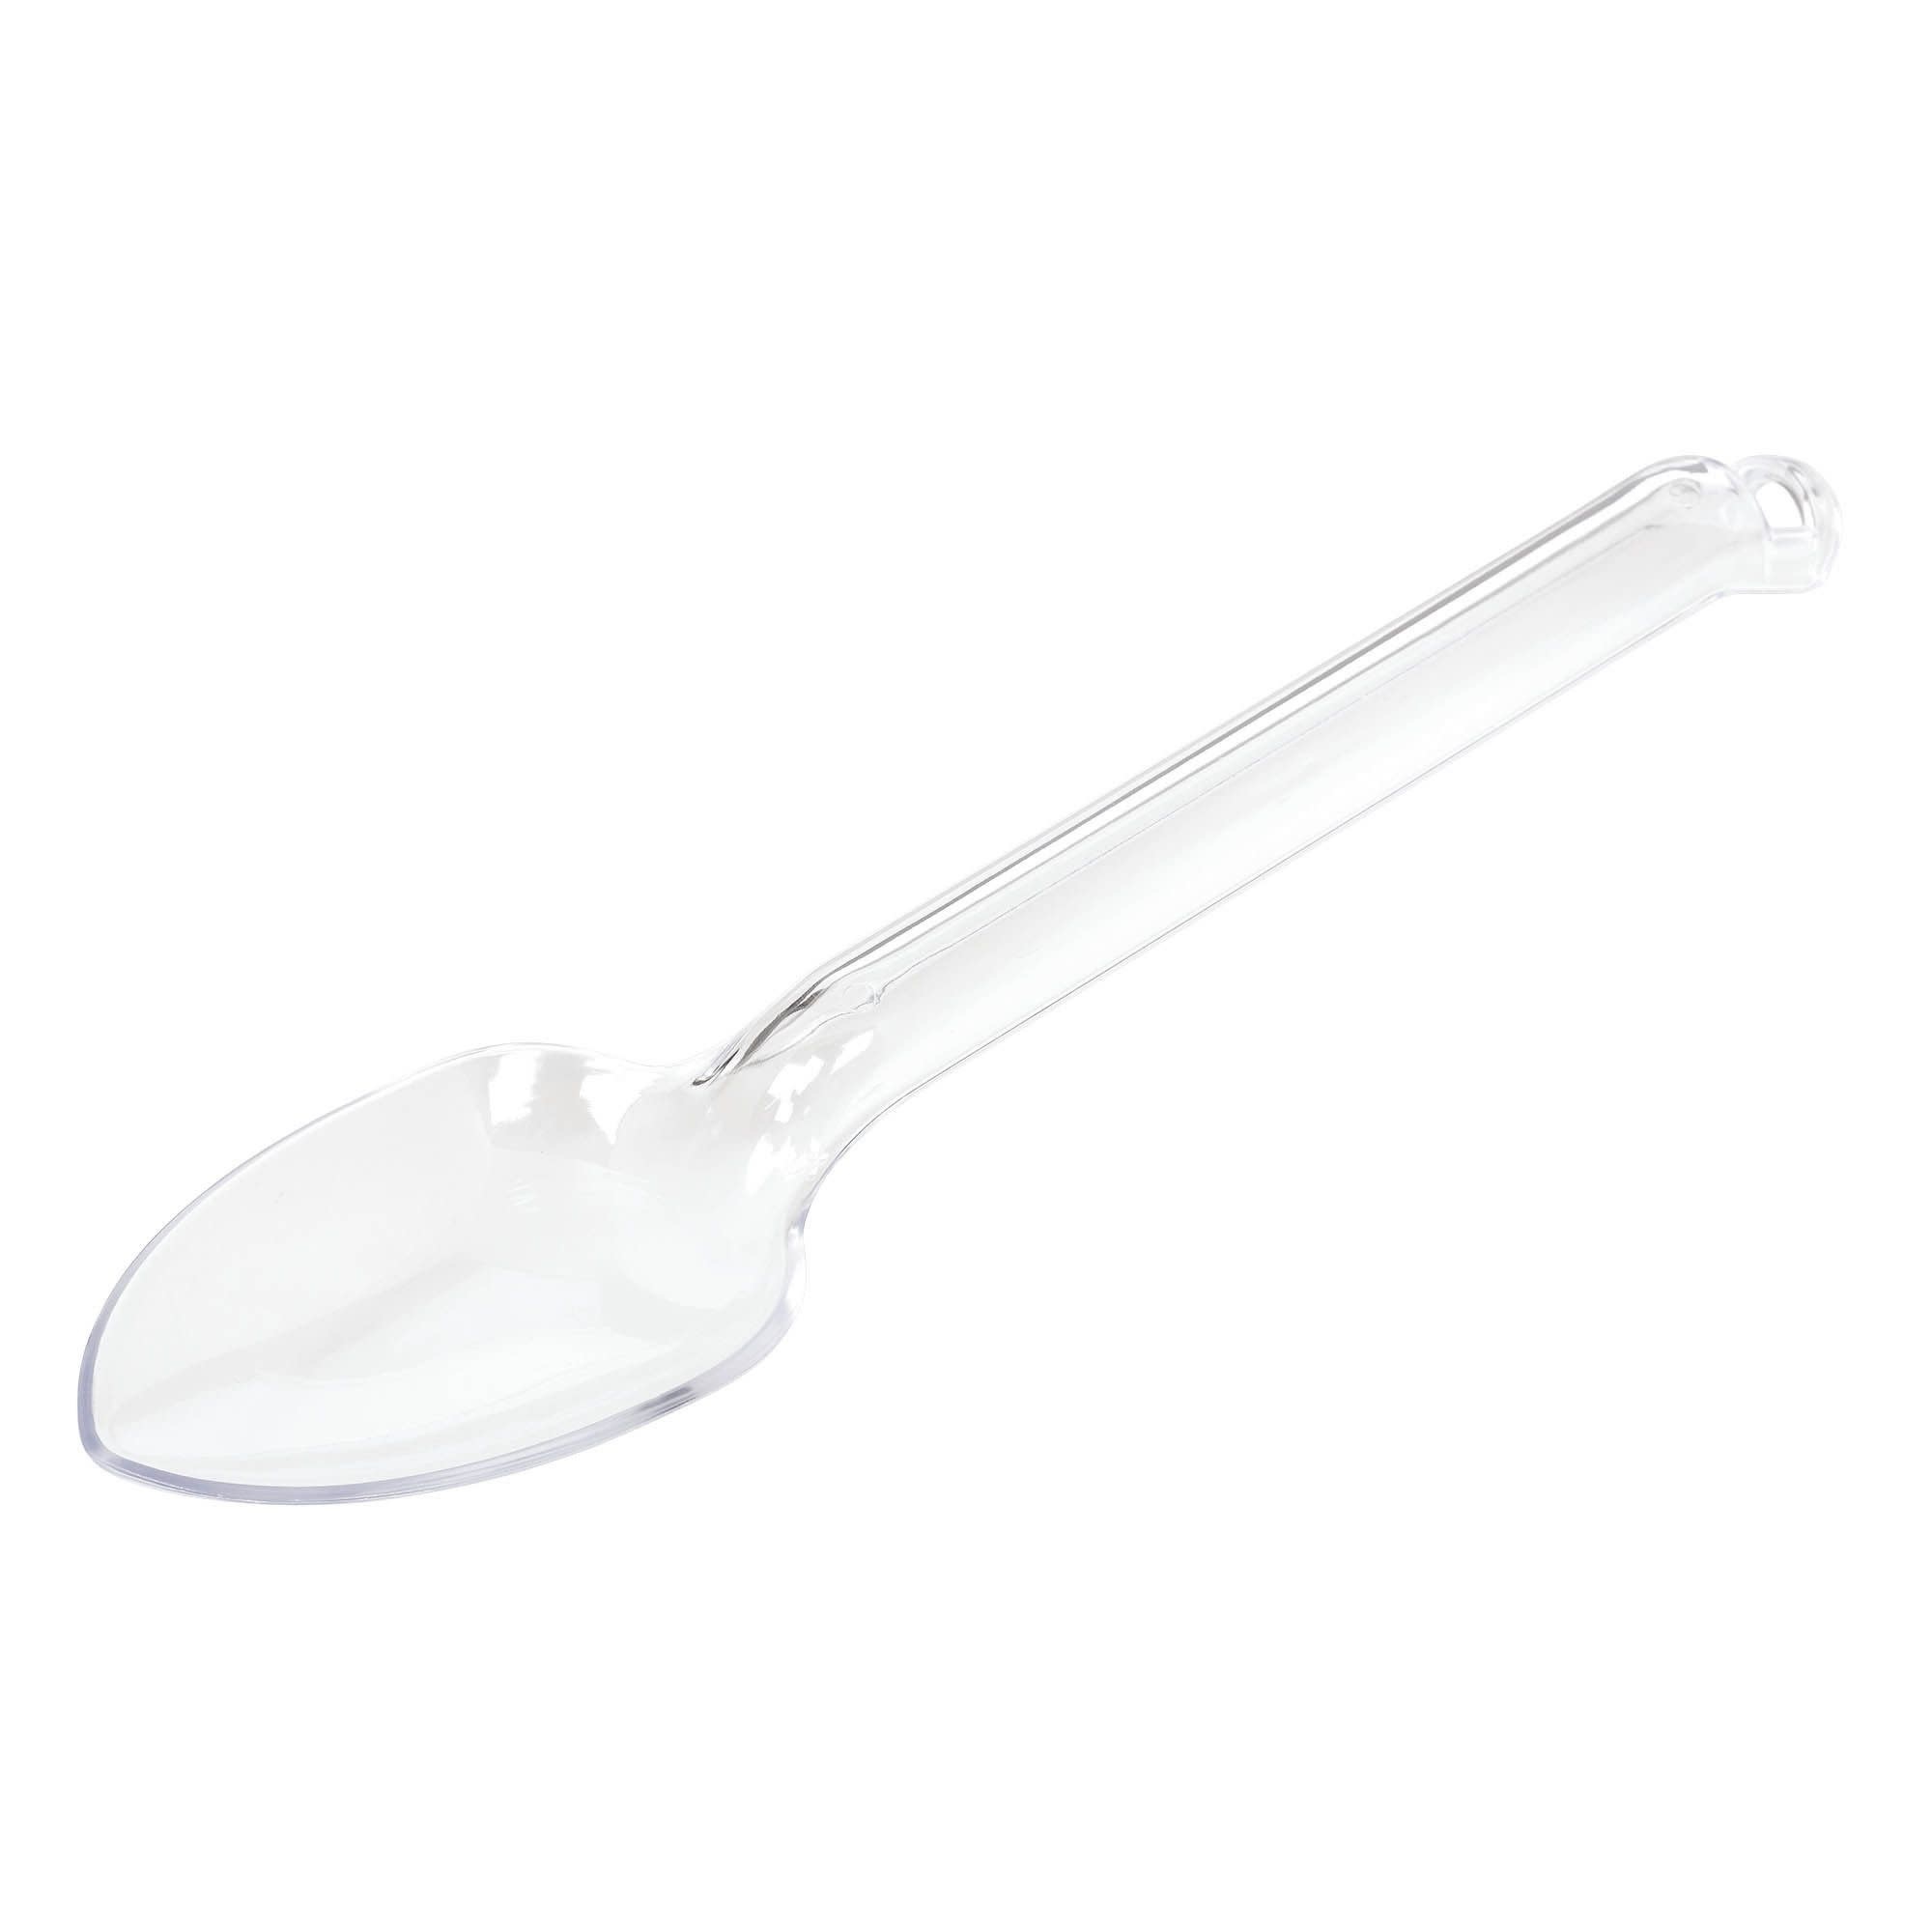 Serving Spoon, 12" - Clear